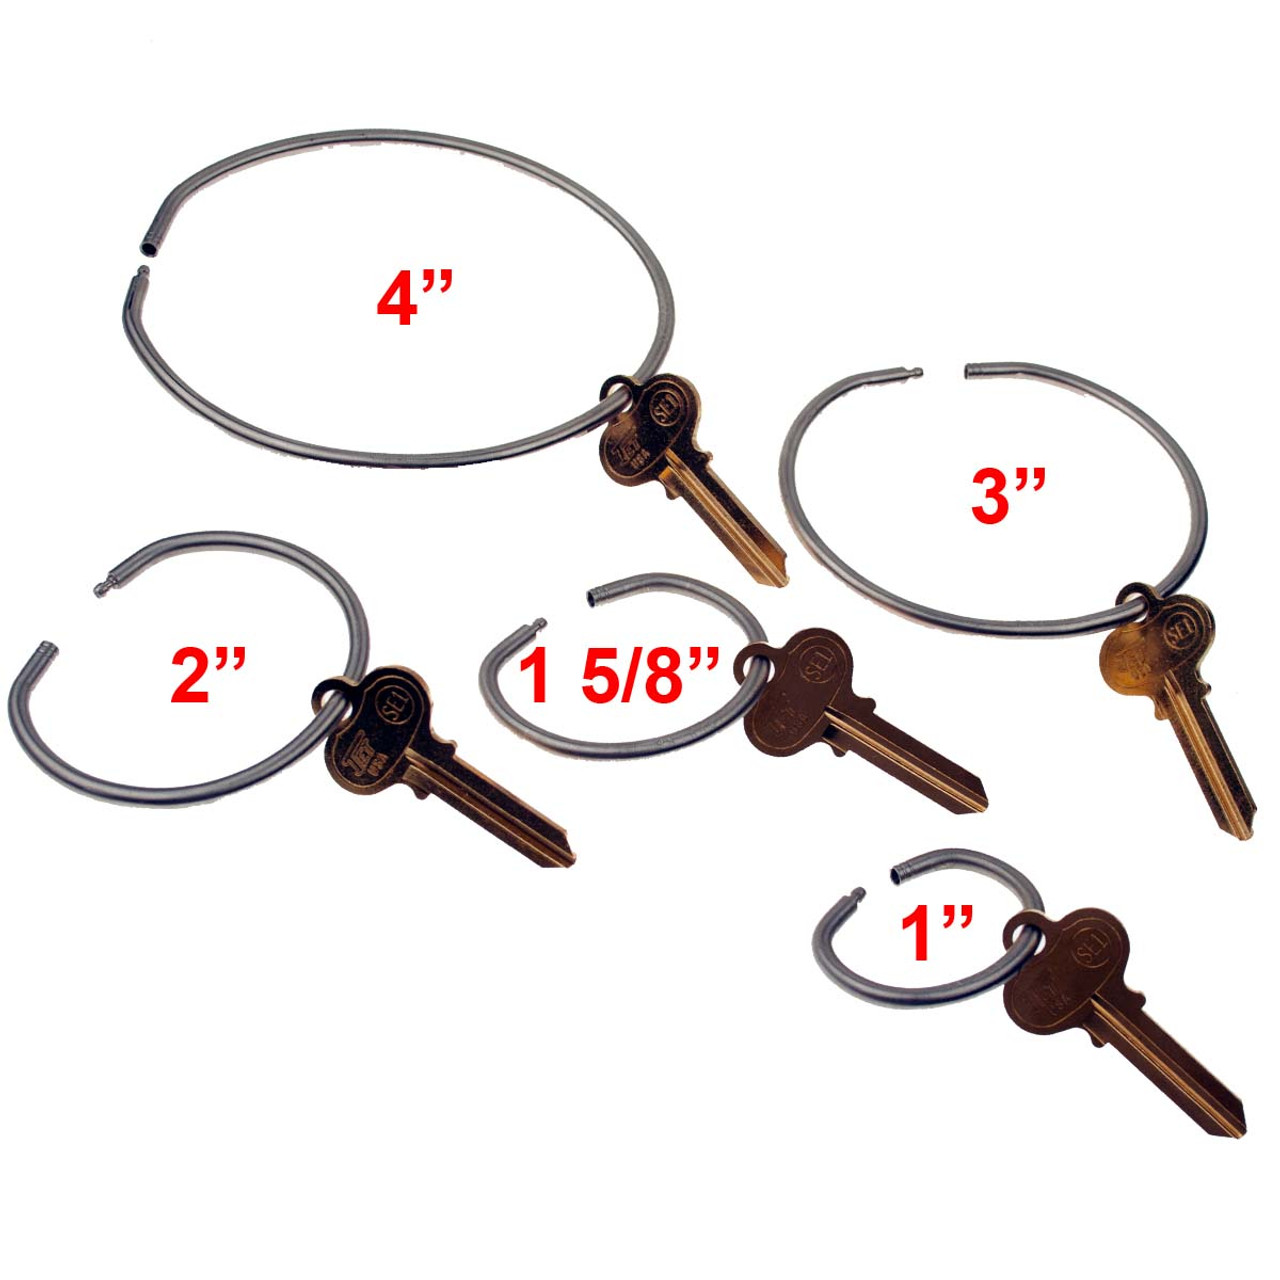 Shop for and Buy Tamper Proof Key Ring 4 Inch Diameter at Keyring